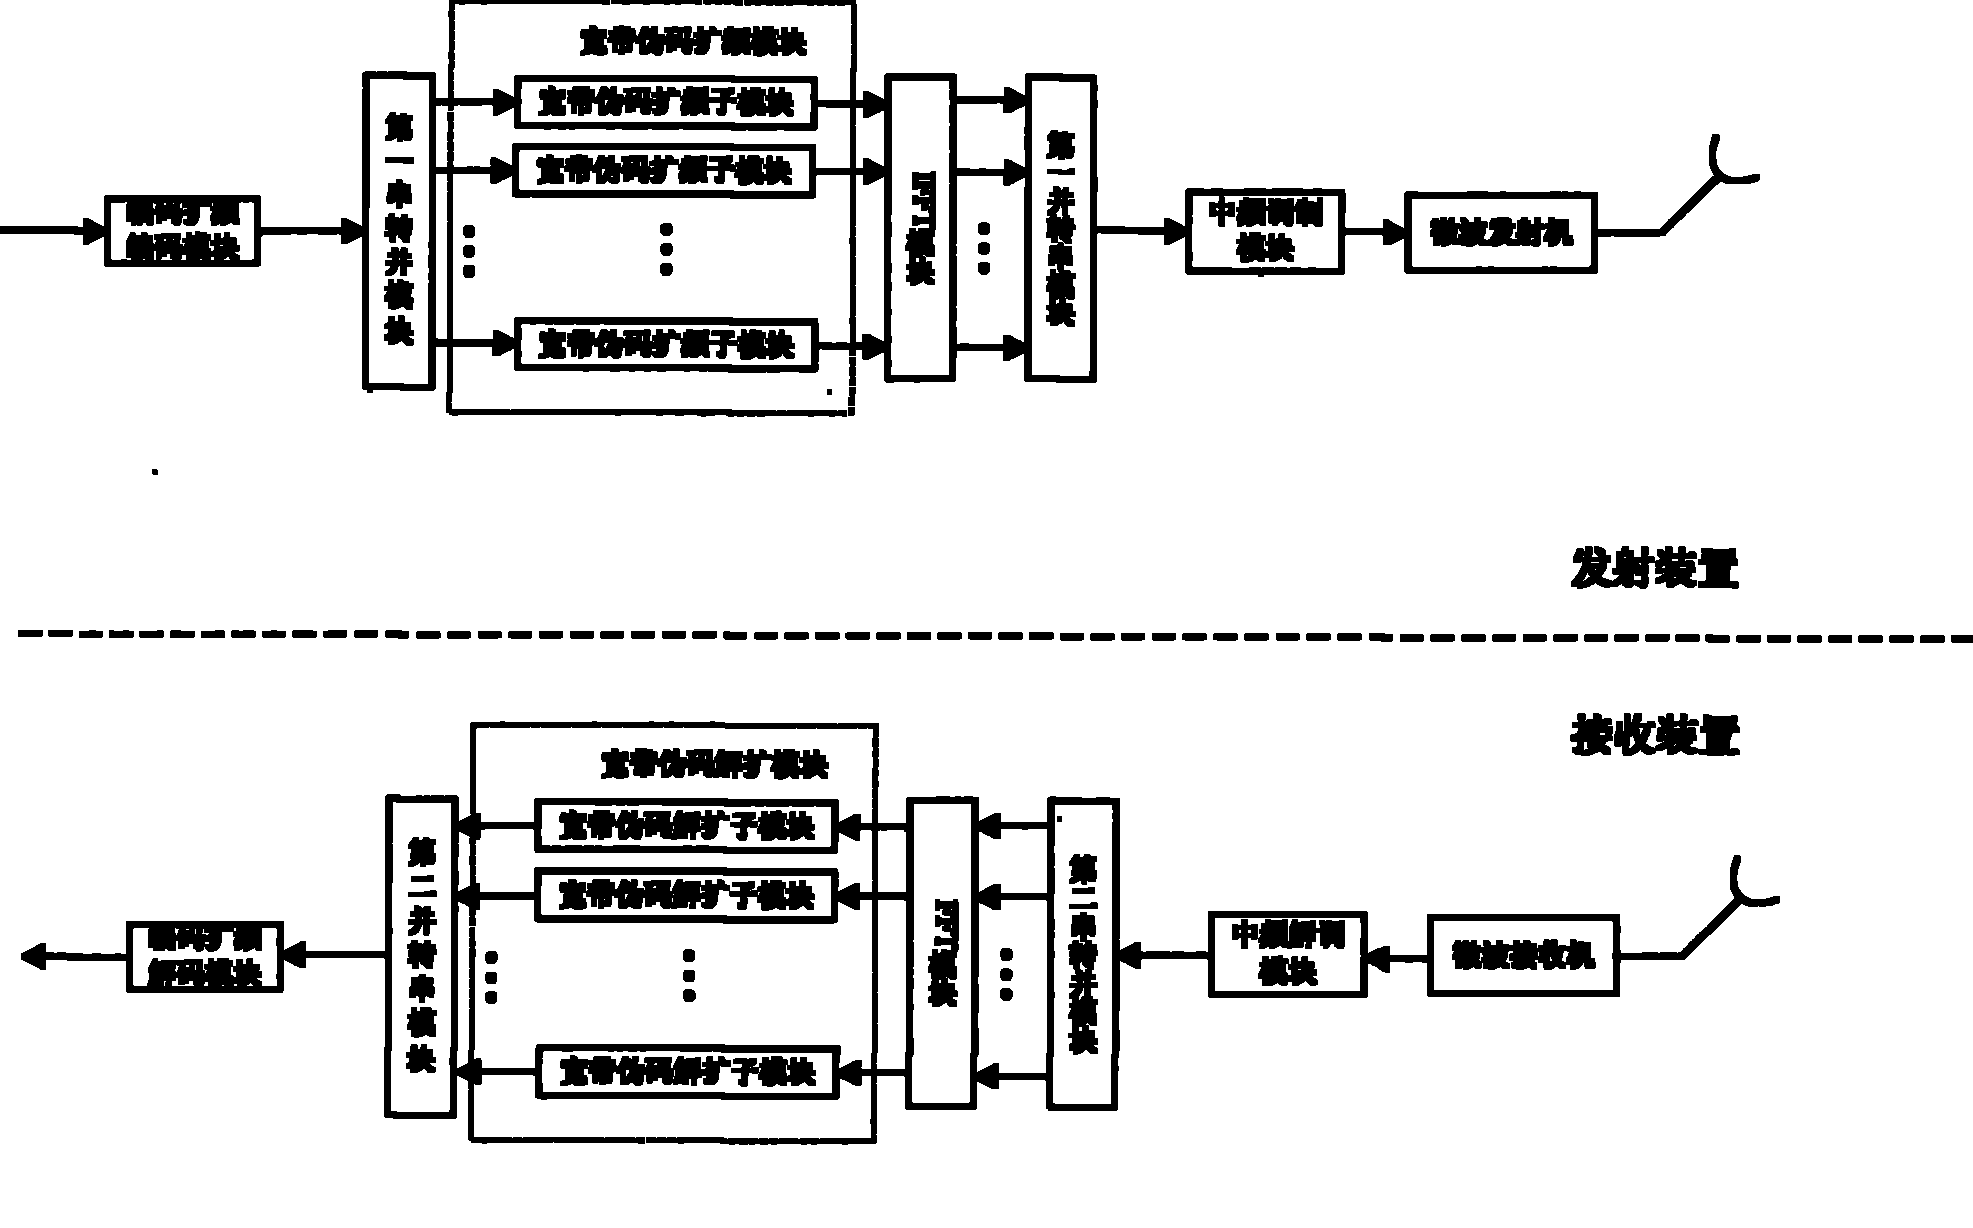 Spectrum-spread type PDH microwave communication system and method